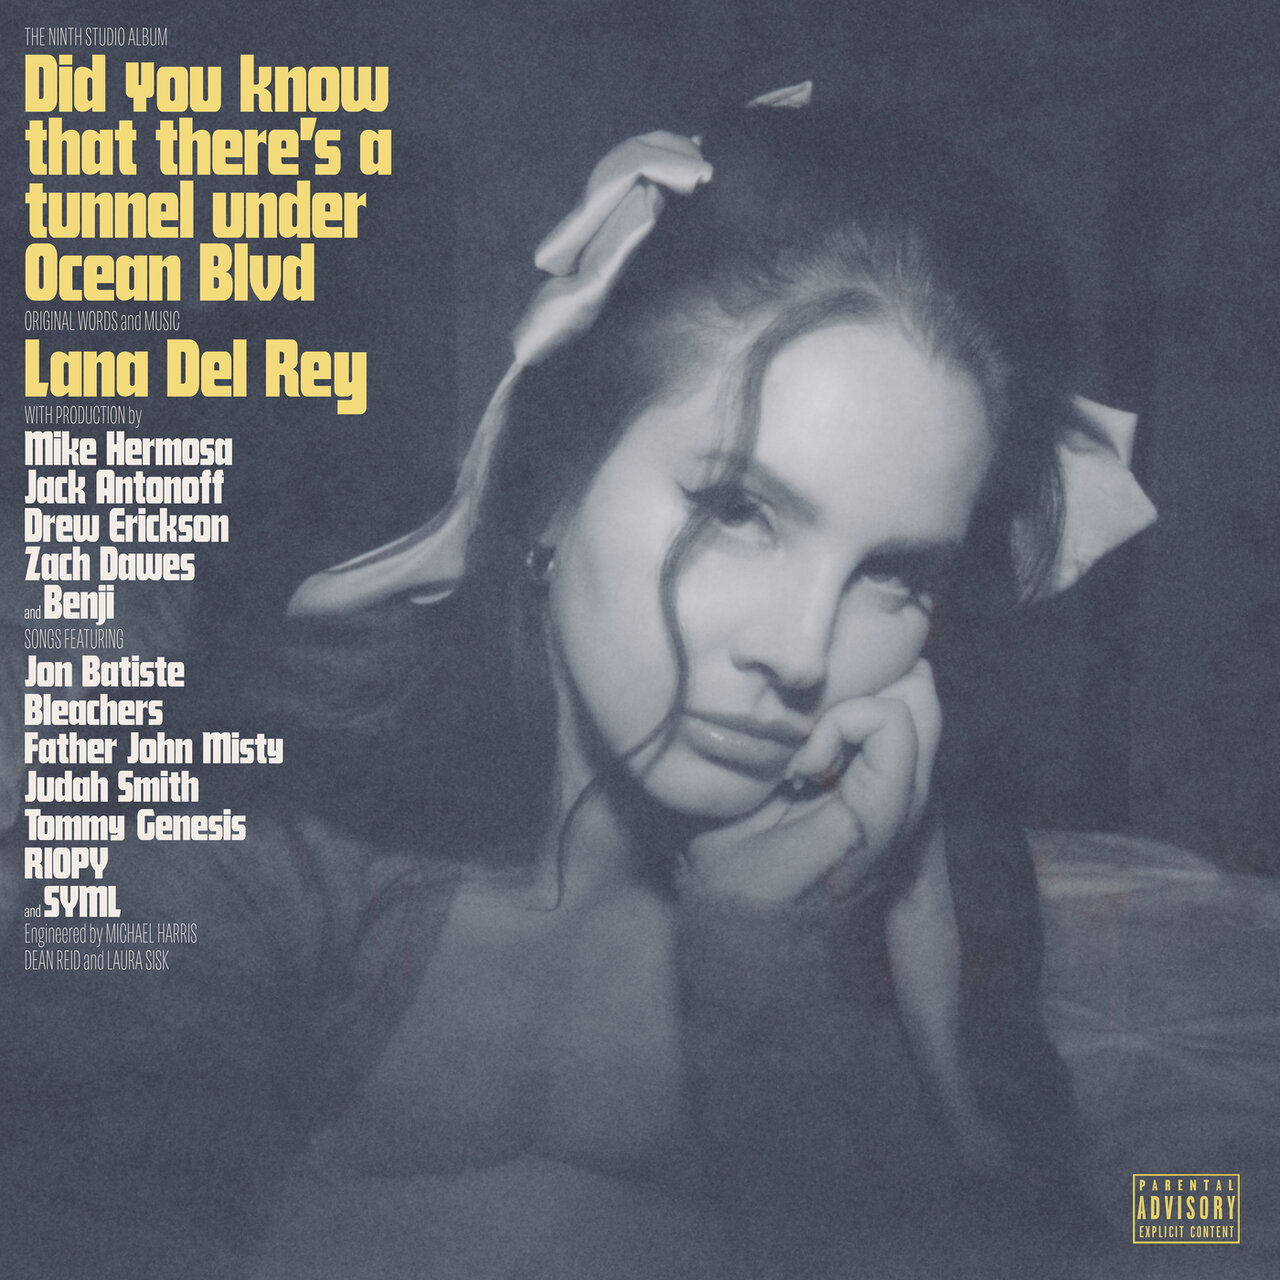 Album cover for 'Did you know that there's a tunnel under Ocean Blvd.' by Lana Del Rey